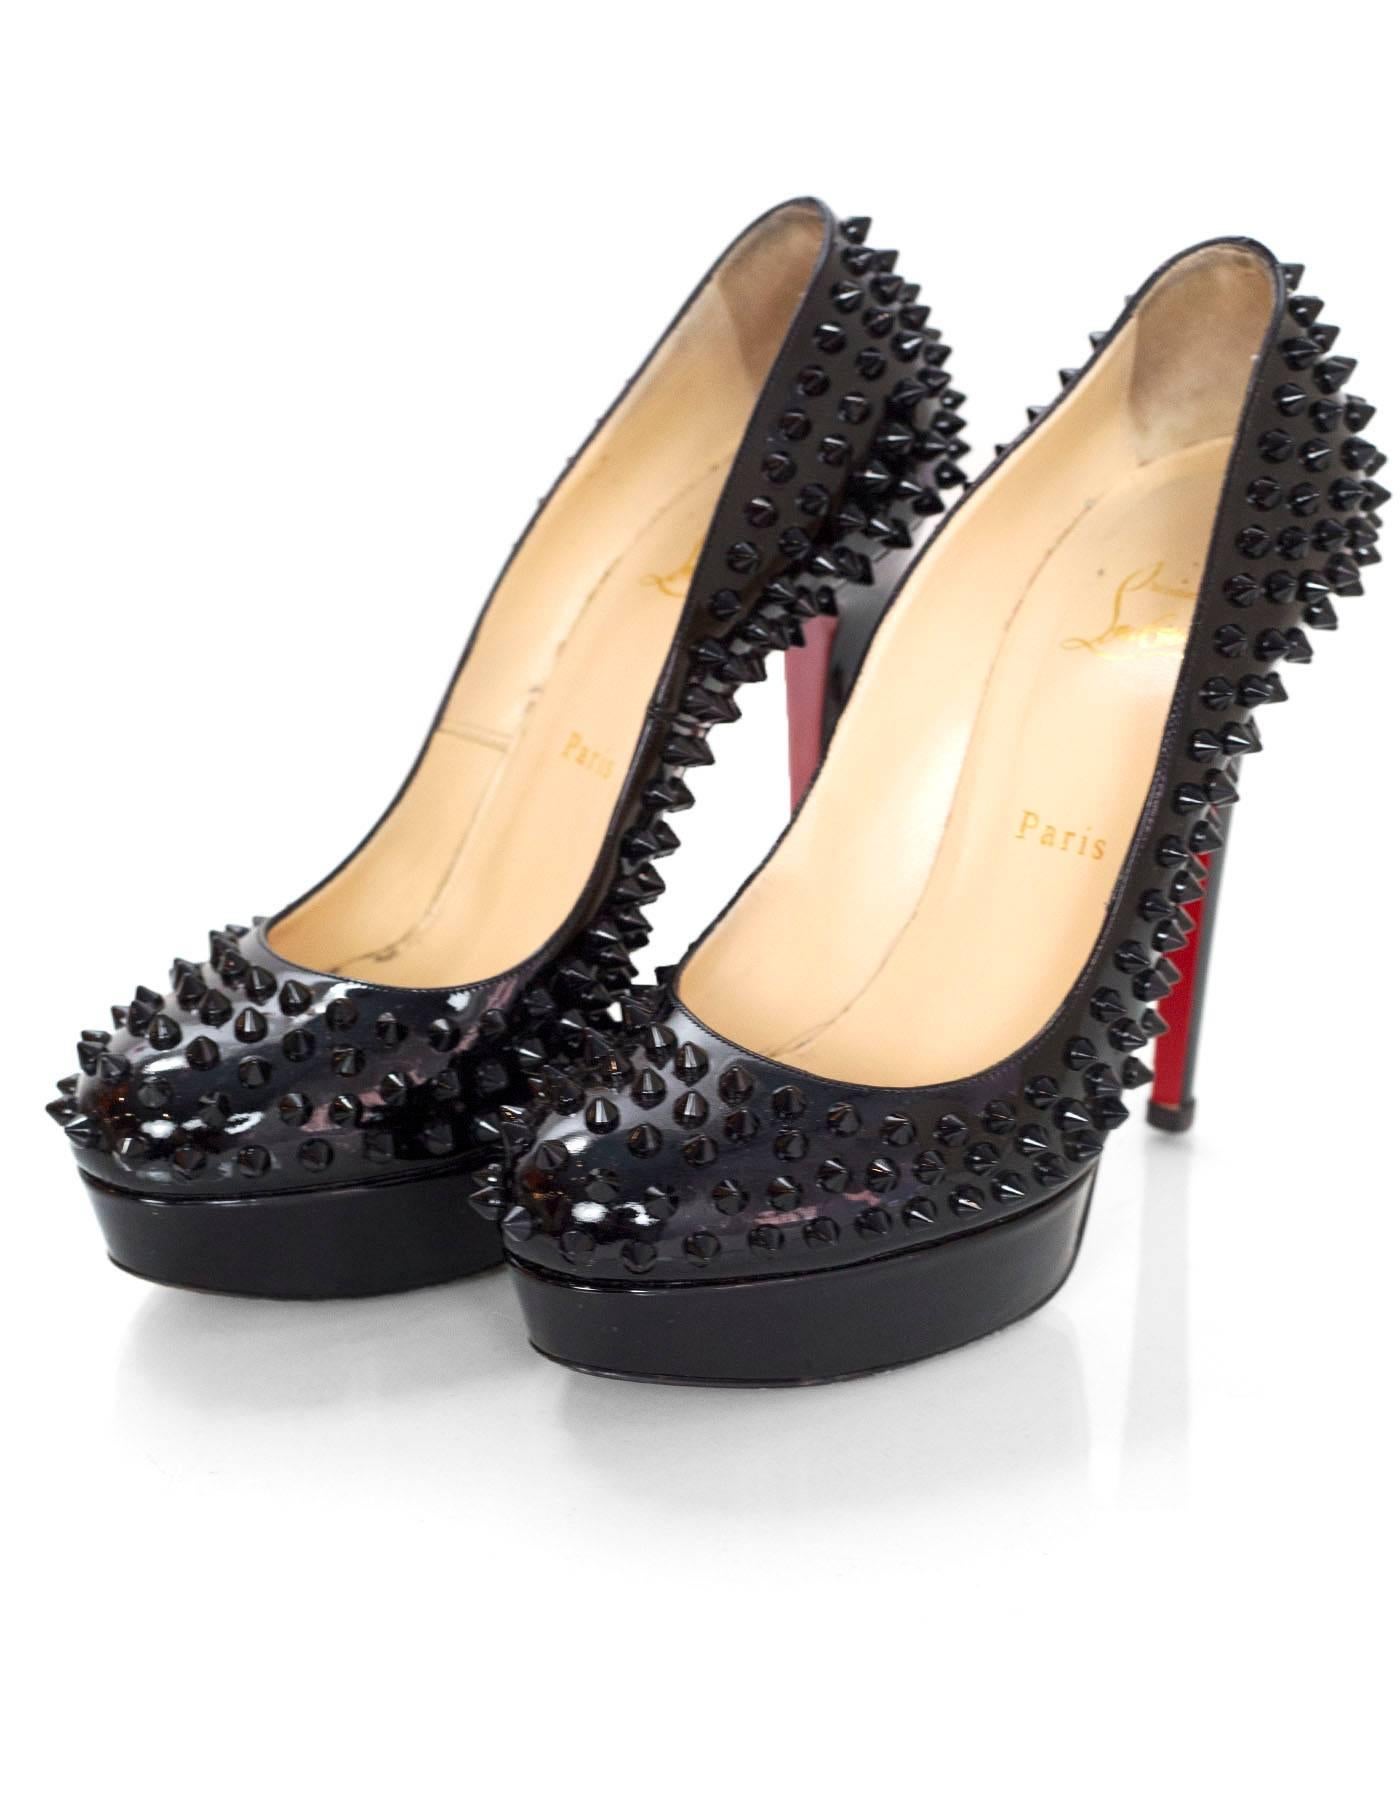 Christian Louboutin Black Patent Bianca Spikes 140 Pumps Sz 39

Made In: Italy
Color: Black
Materials: Patent leather
Closure/Opening: Slide on
Sole Stamp: Christian Louboutin Made in Italy 39
Retail Price: $1,295 + tax
Overall Condition: Excellent